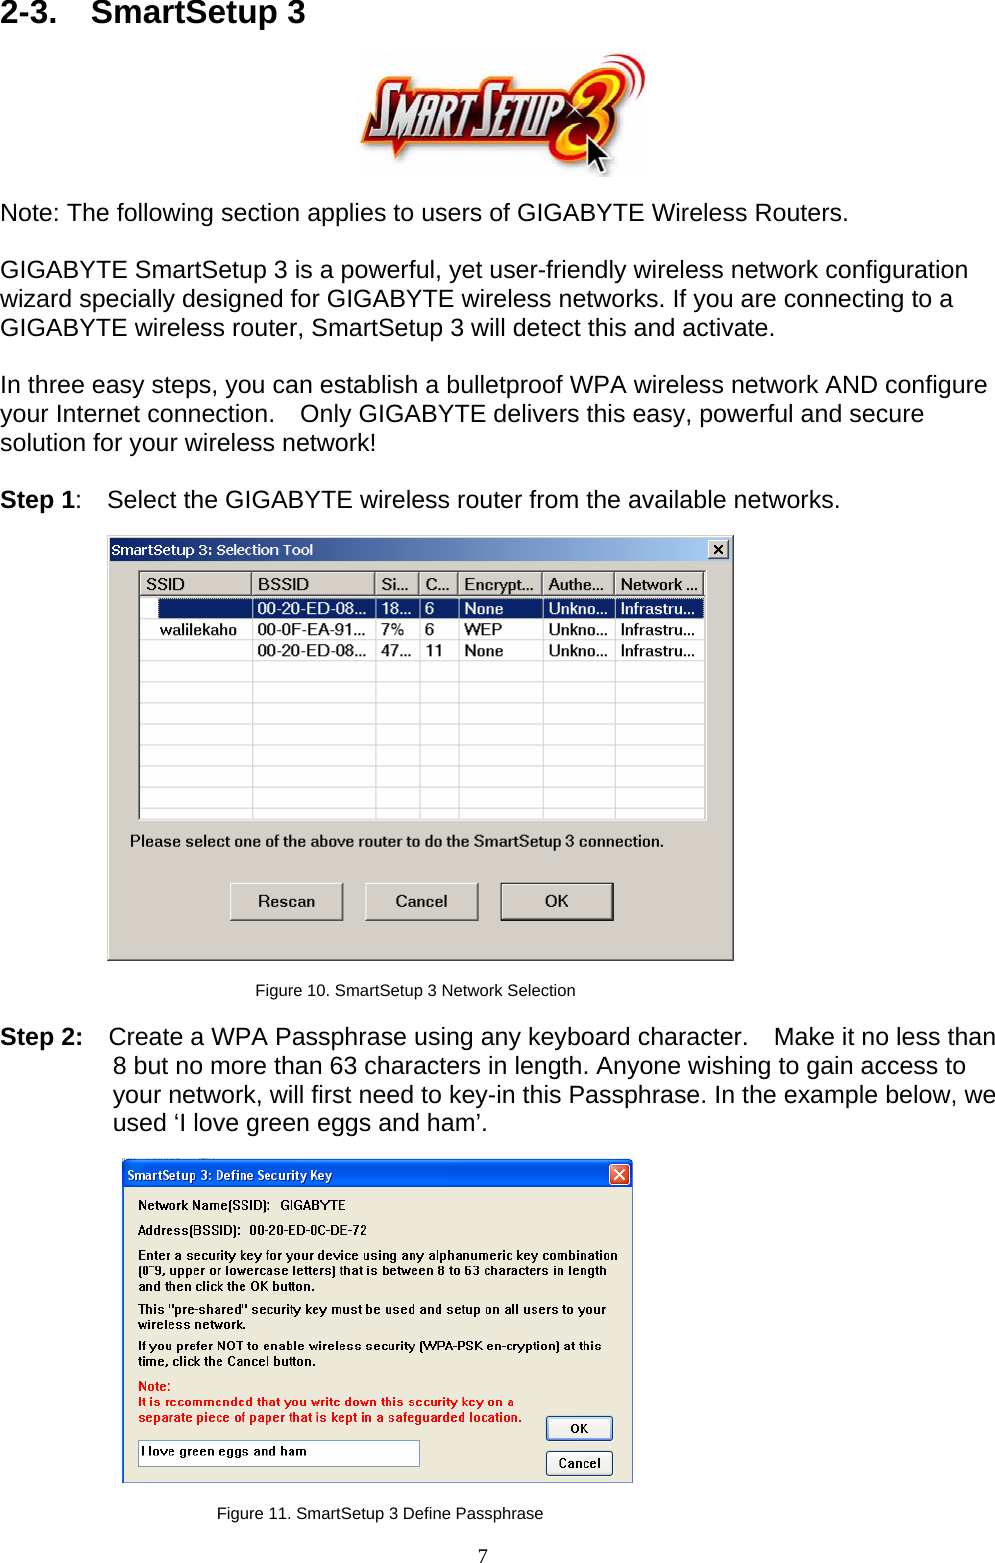 7   2-3.  SmartSetup 3     Note: The following section applies to users of GIGABYTE Wireless Routers.  GIGABYTE SmartSetup 3 is a powerful, yet user-friendly wireless network configuration wizard specially designed for GIGABYTE wireless networks. If you are connecting to a GIGABYTE wireless router, SmartSetup 3 will detect this and activate.      In three easy steps, you can establish a bulletproof WPA wireless network AND configure your Internet connection.    Only GIGABYTE delivers this easy, powerful and secure solution for your wireless network!  Step 1:    Select the GIGABYTE wireless router from the available networks.    Figure 10. SmartSetup 3 Network Selection  Step 2:    Create a WPA Passphrase using any keyboard character.    Make it no less than 8 but no more than 63 characters in length. Anyone wishing to gain access to your network, will first need to key-in this Passphrase. In the example below, we used ‘I love green eggs and ham’.    Figure 11. SmartSetup 3 Define Passphrase 